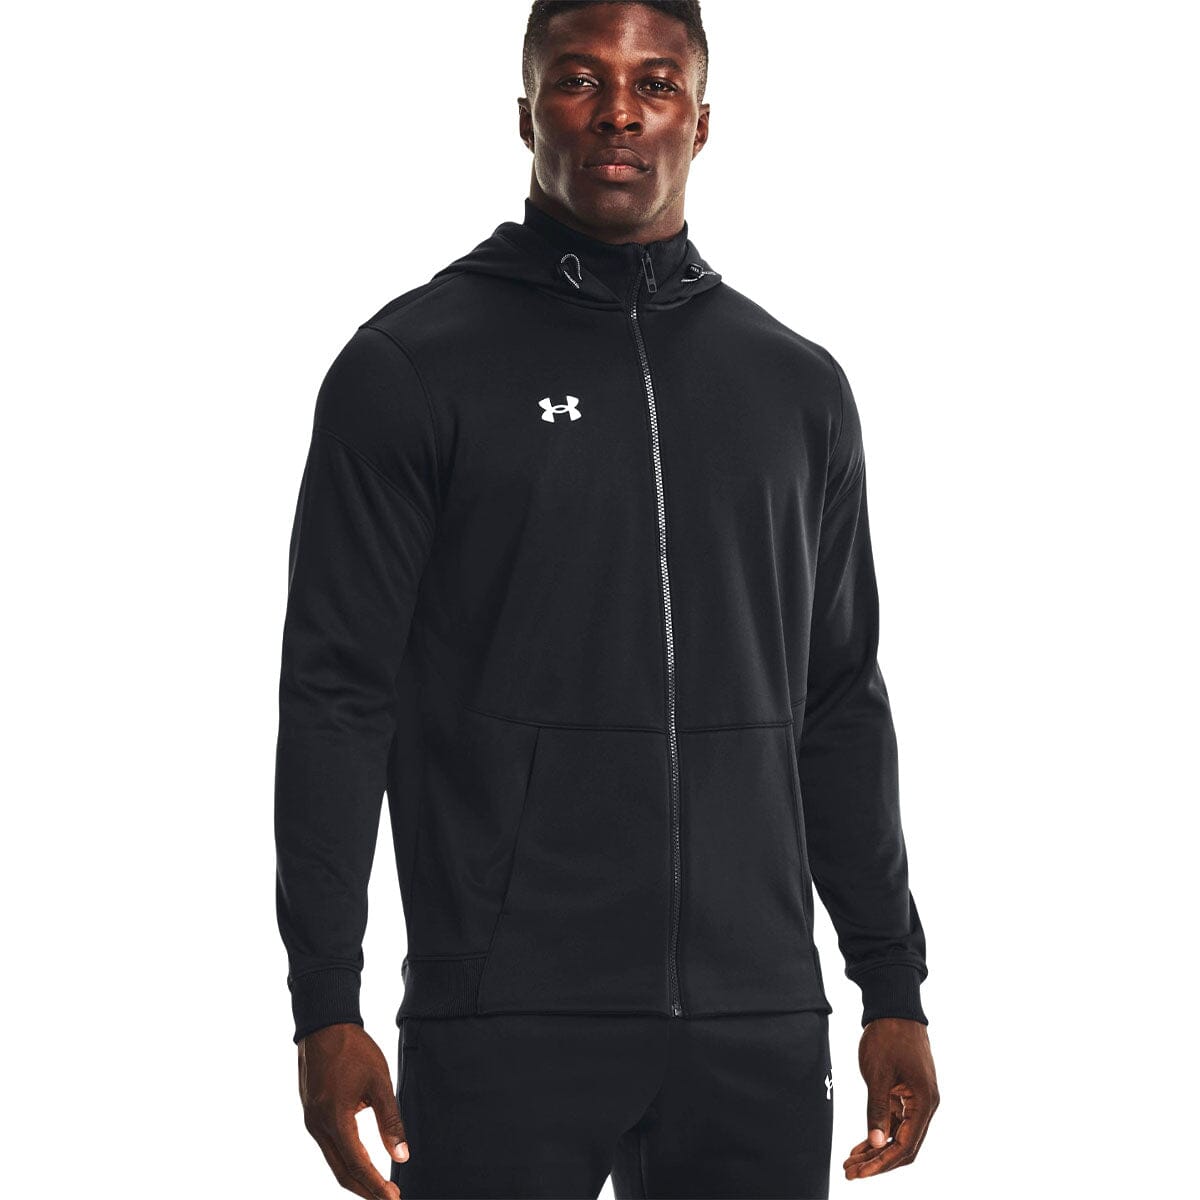 Under Armour Men's Armour Fleece® Storm Full-Zip | 1370381-001 Jacket Under Armour Adult Small Black / White 